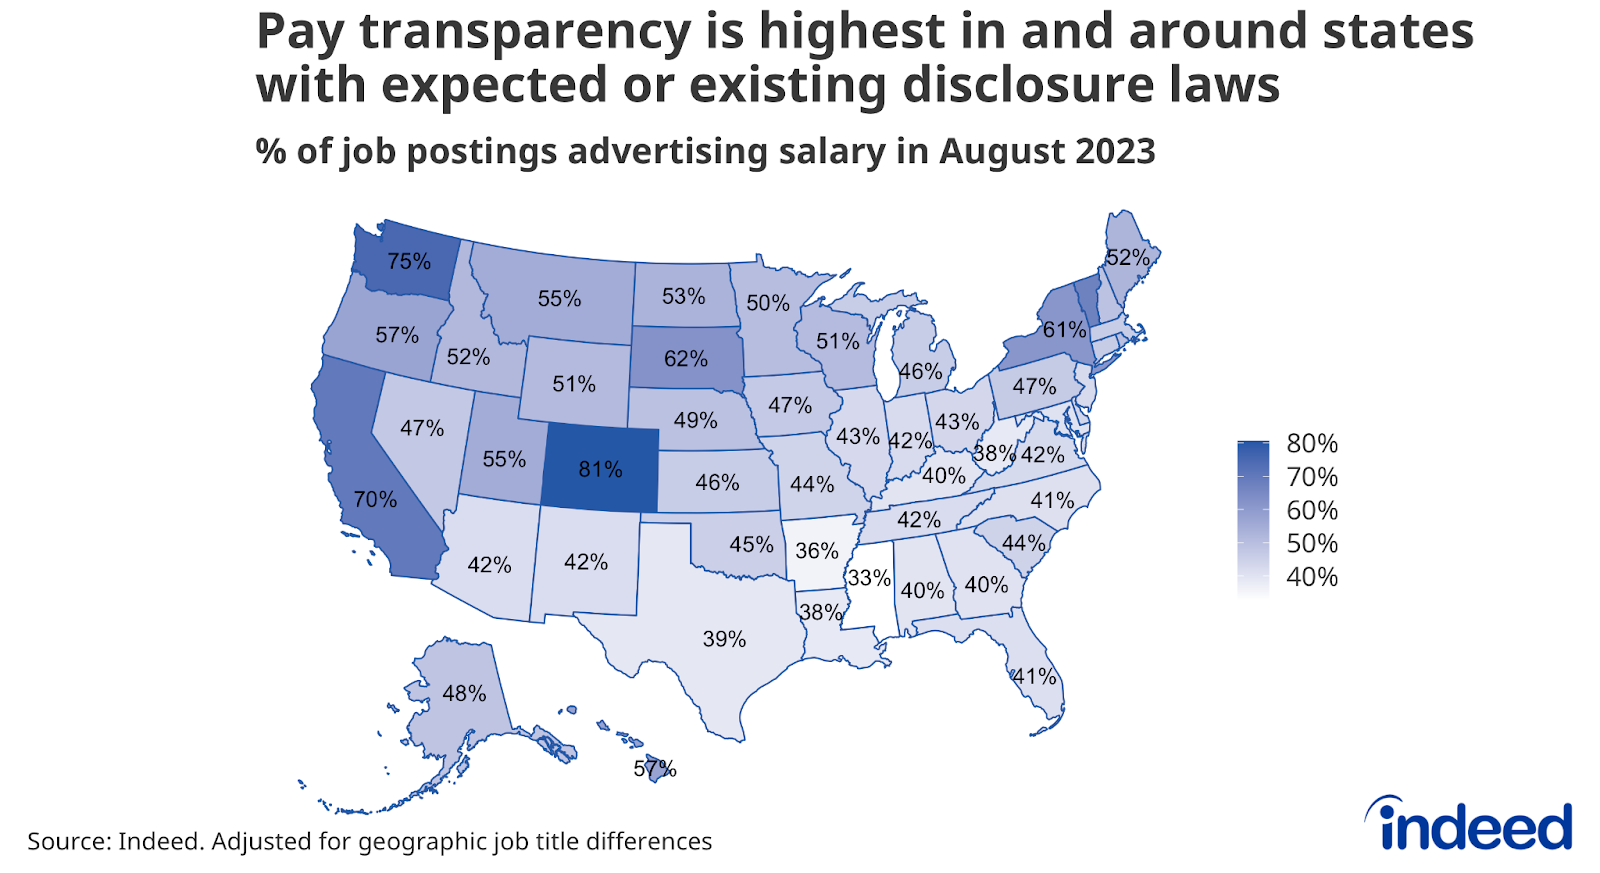 Map titled “Pay transparency is highest in and around states with expected or existing disclosure laws,” with states shaded from white to dark blue, where dark blue represents higher pay transparency rates. Indeed tracked the percentage share of US job postings that included employer-provided salaries in August 2023. States with pay transparency laws are shaded darkest with Colorado at 81%, Washington at 75%, and California at 70%.